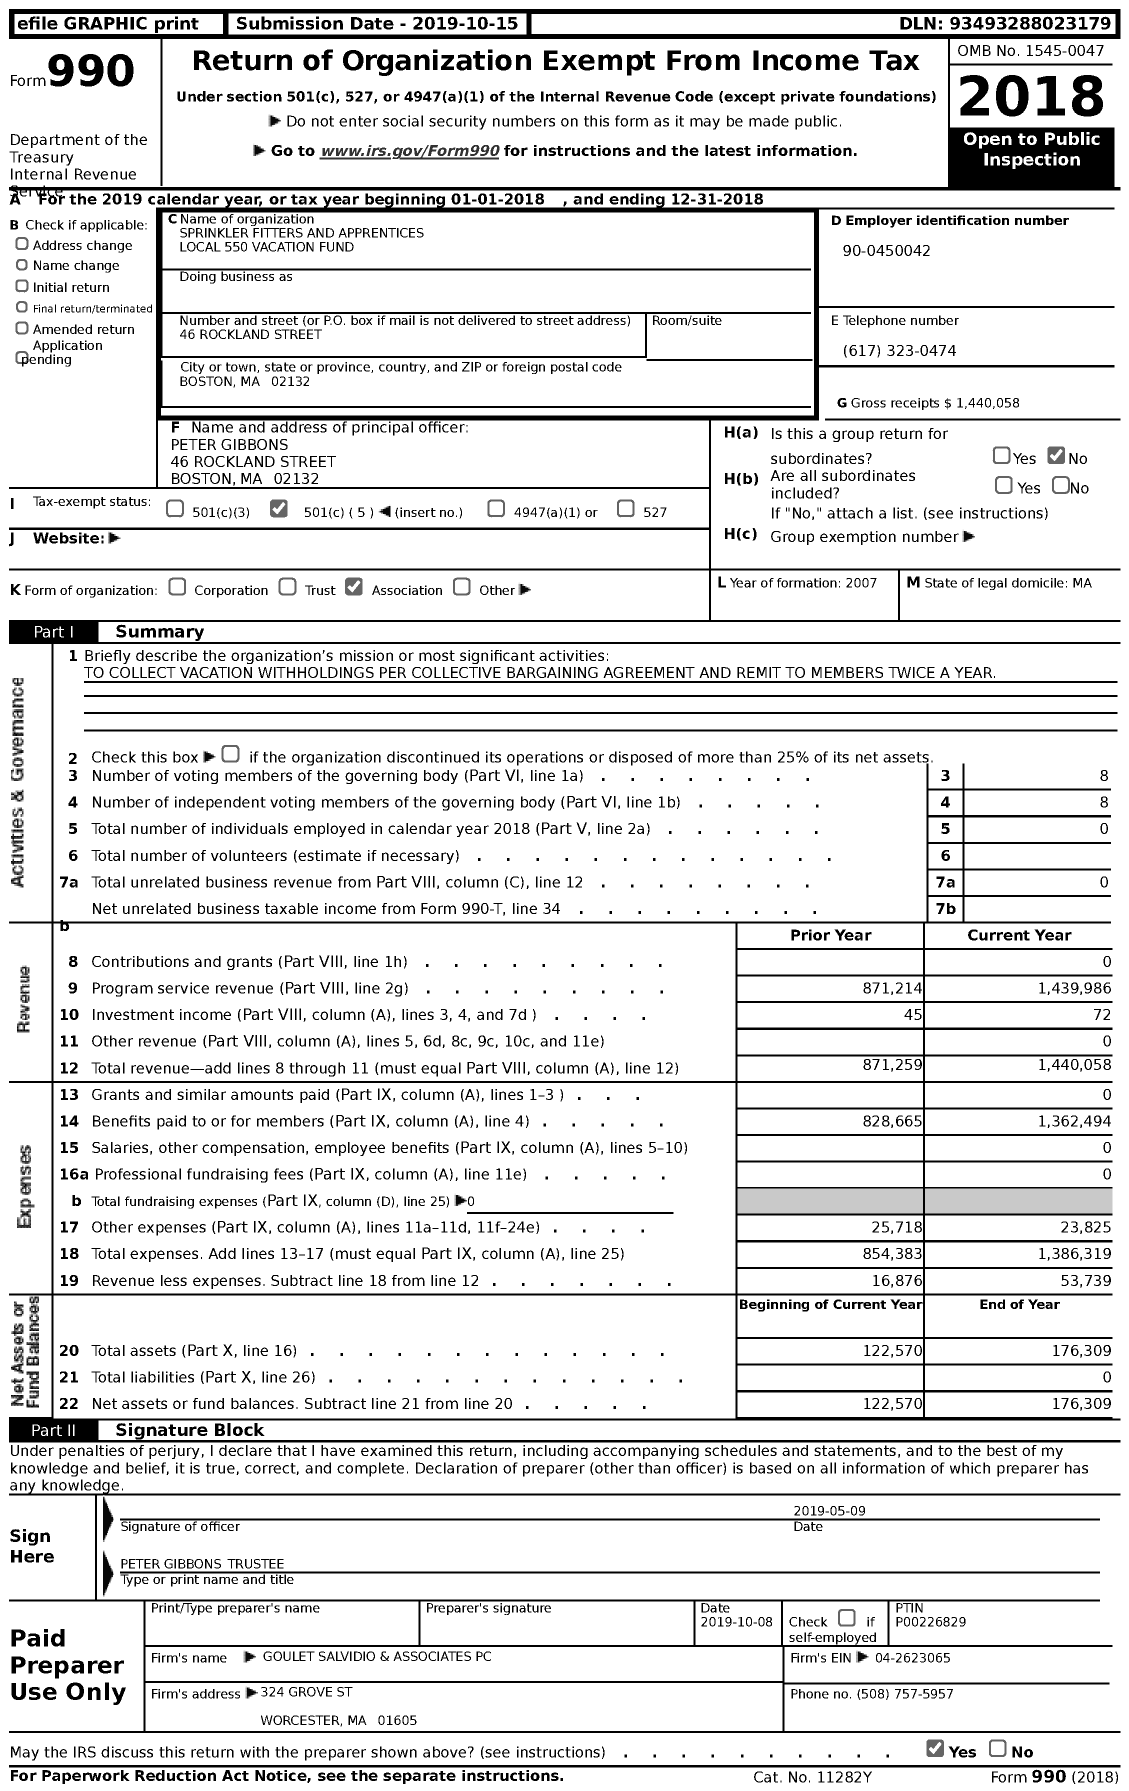 Image of first page of 2018 Form 990 for Sprinkler Fitters and Apprentices Local 550 Vacation Fund